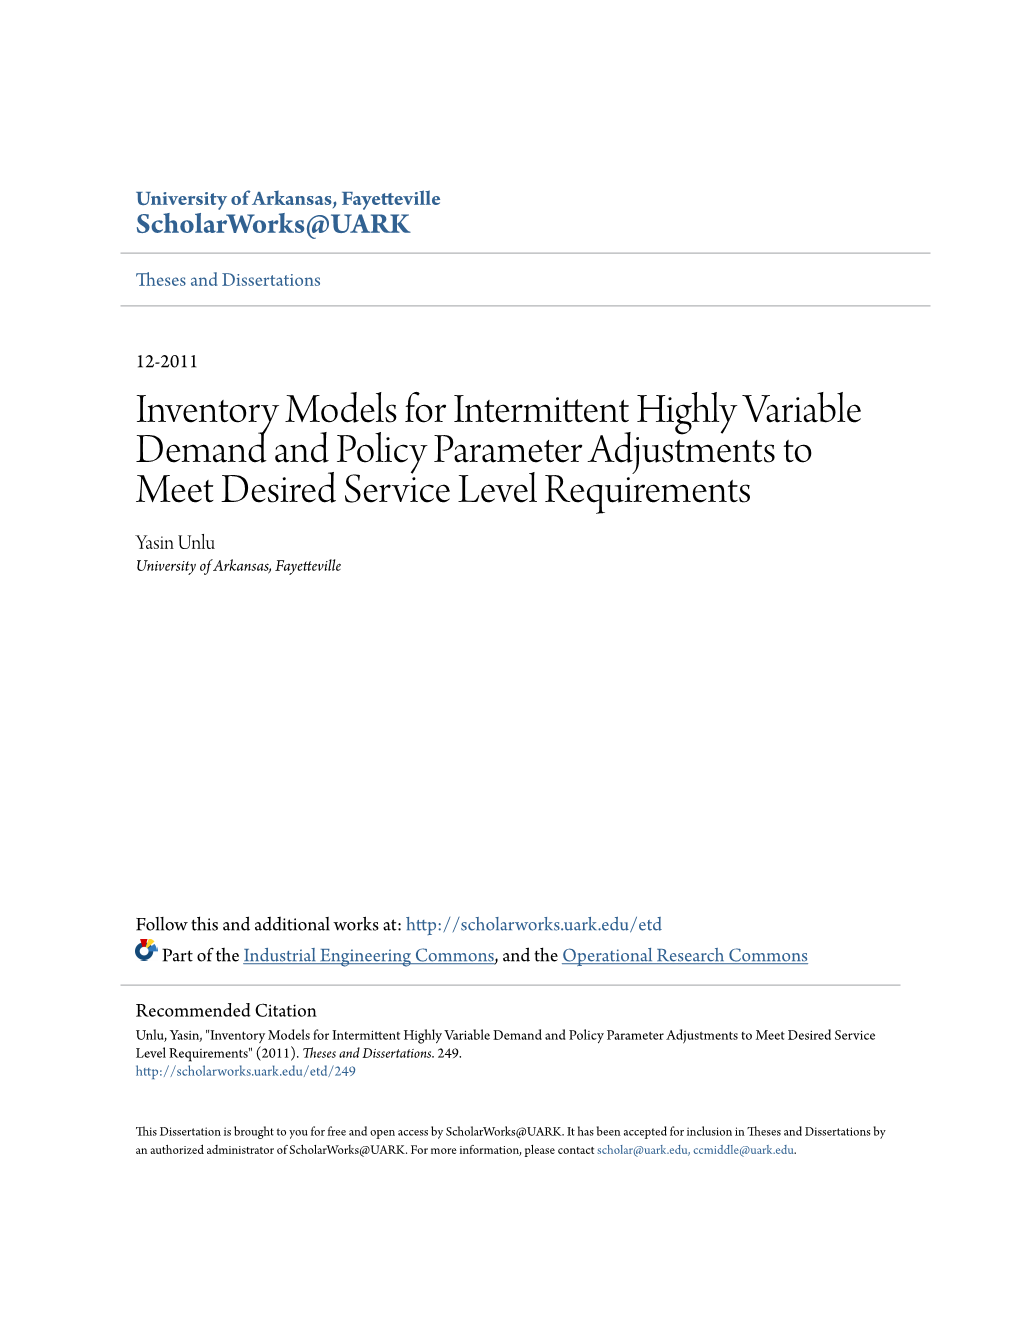 Inventory Models for Intermittent Highly Variable Demand and Policy